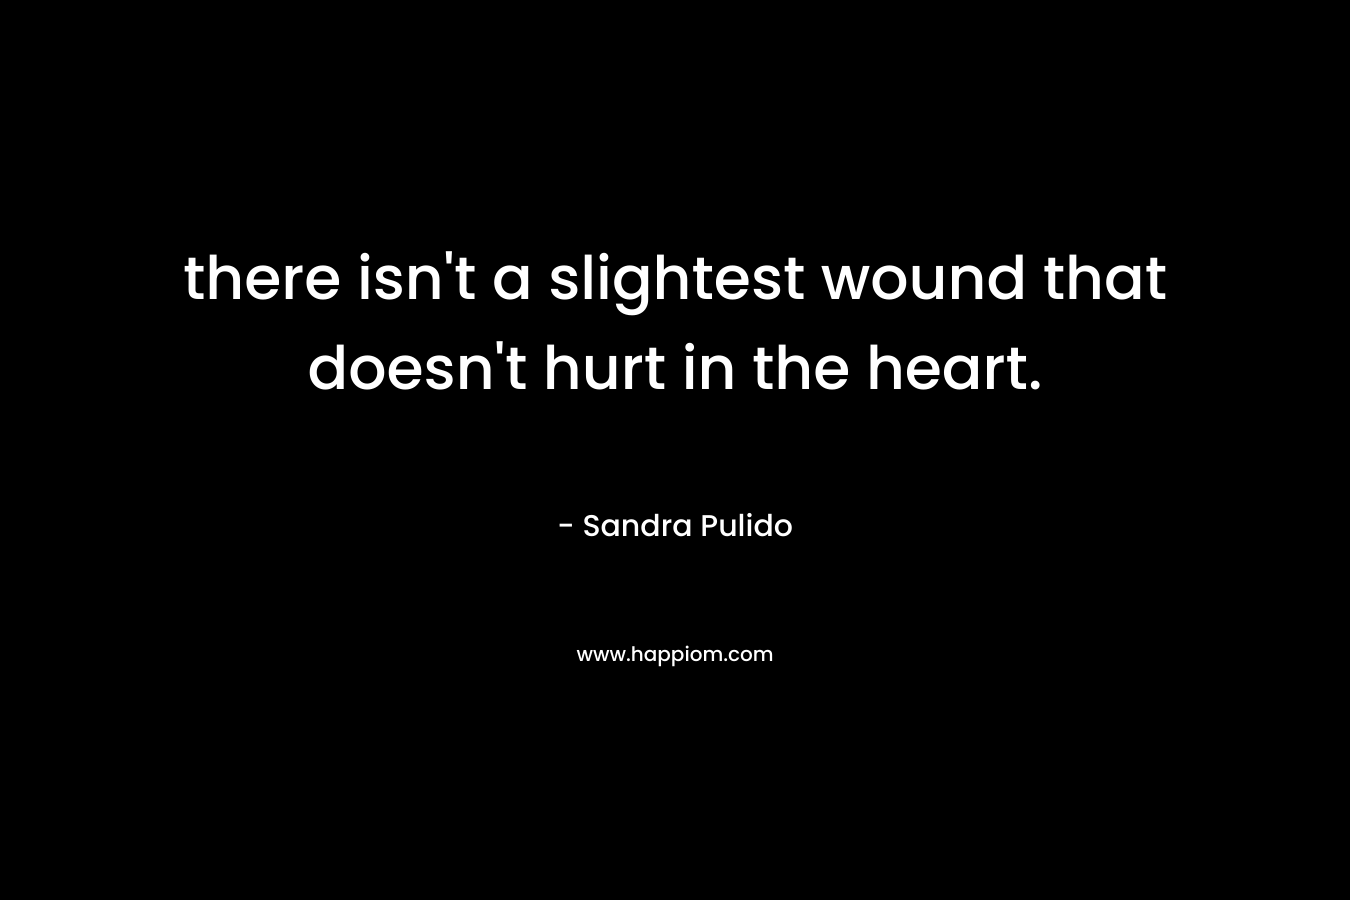 there isn't a slightest wound that doesn't hurt in the heart.